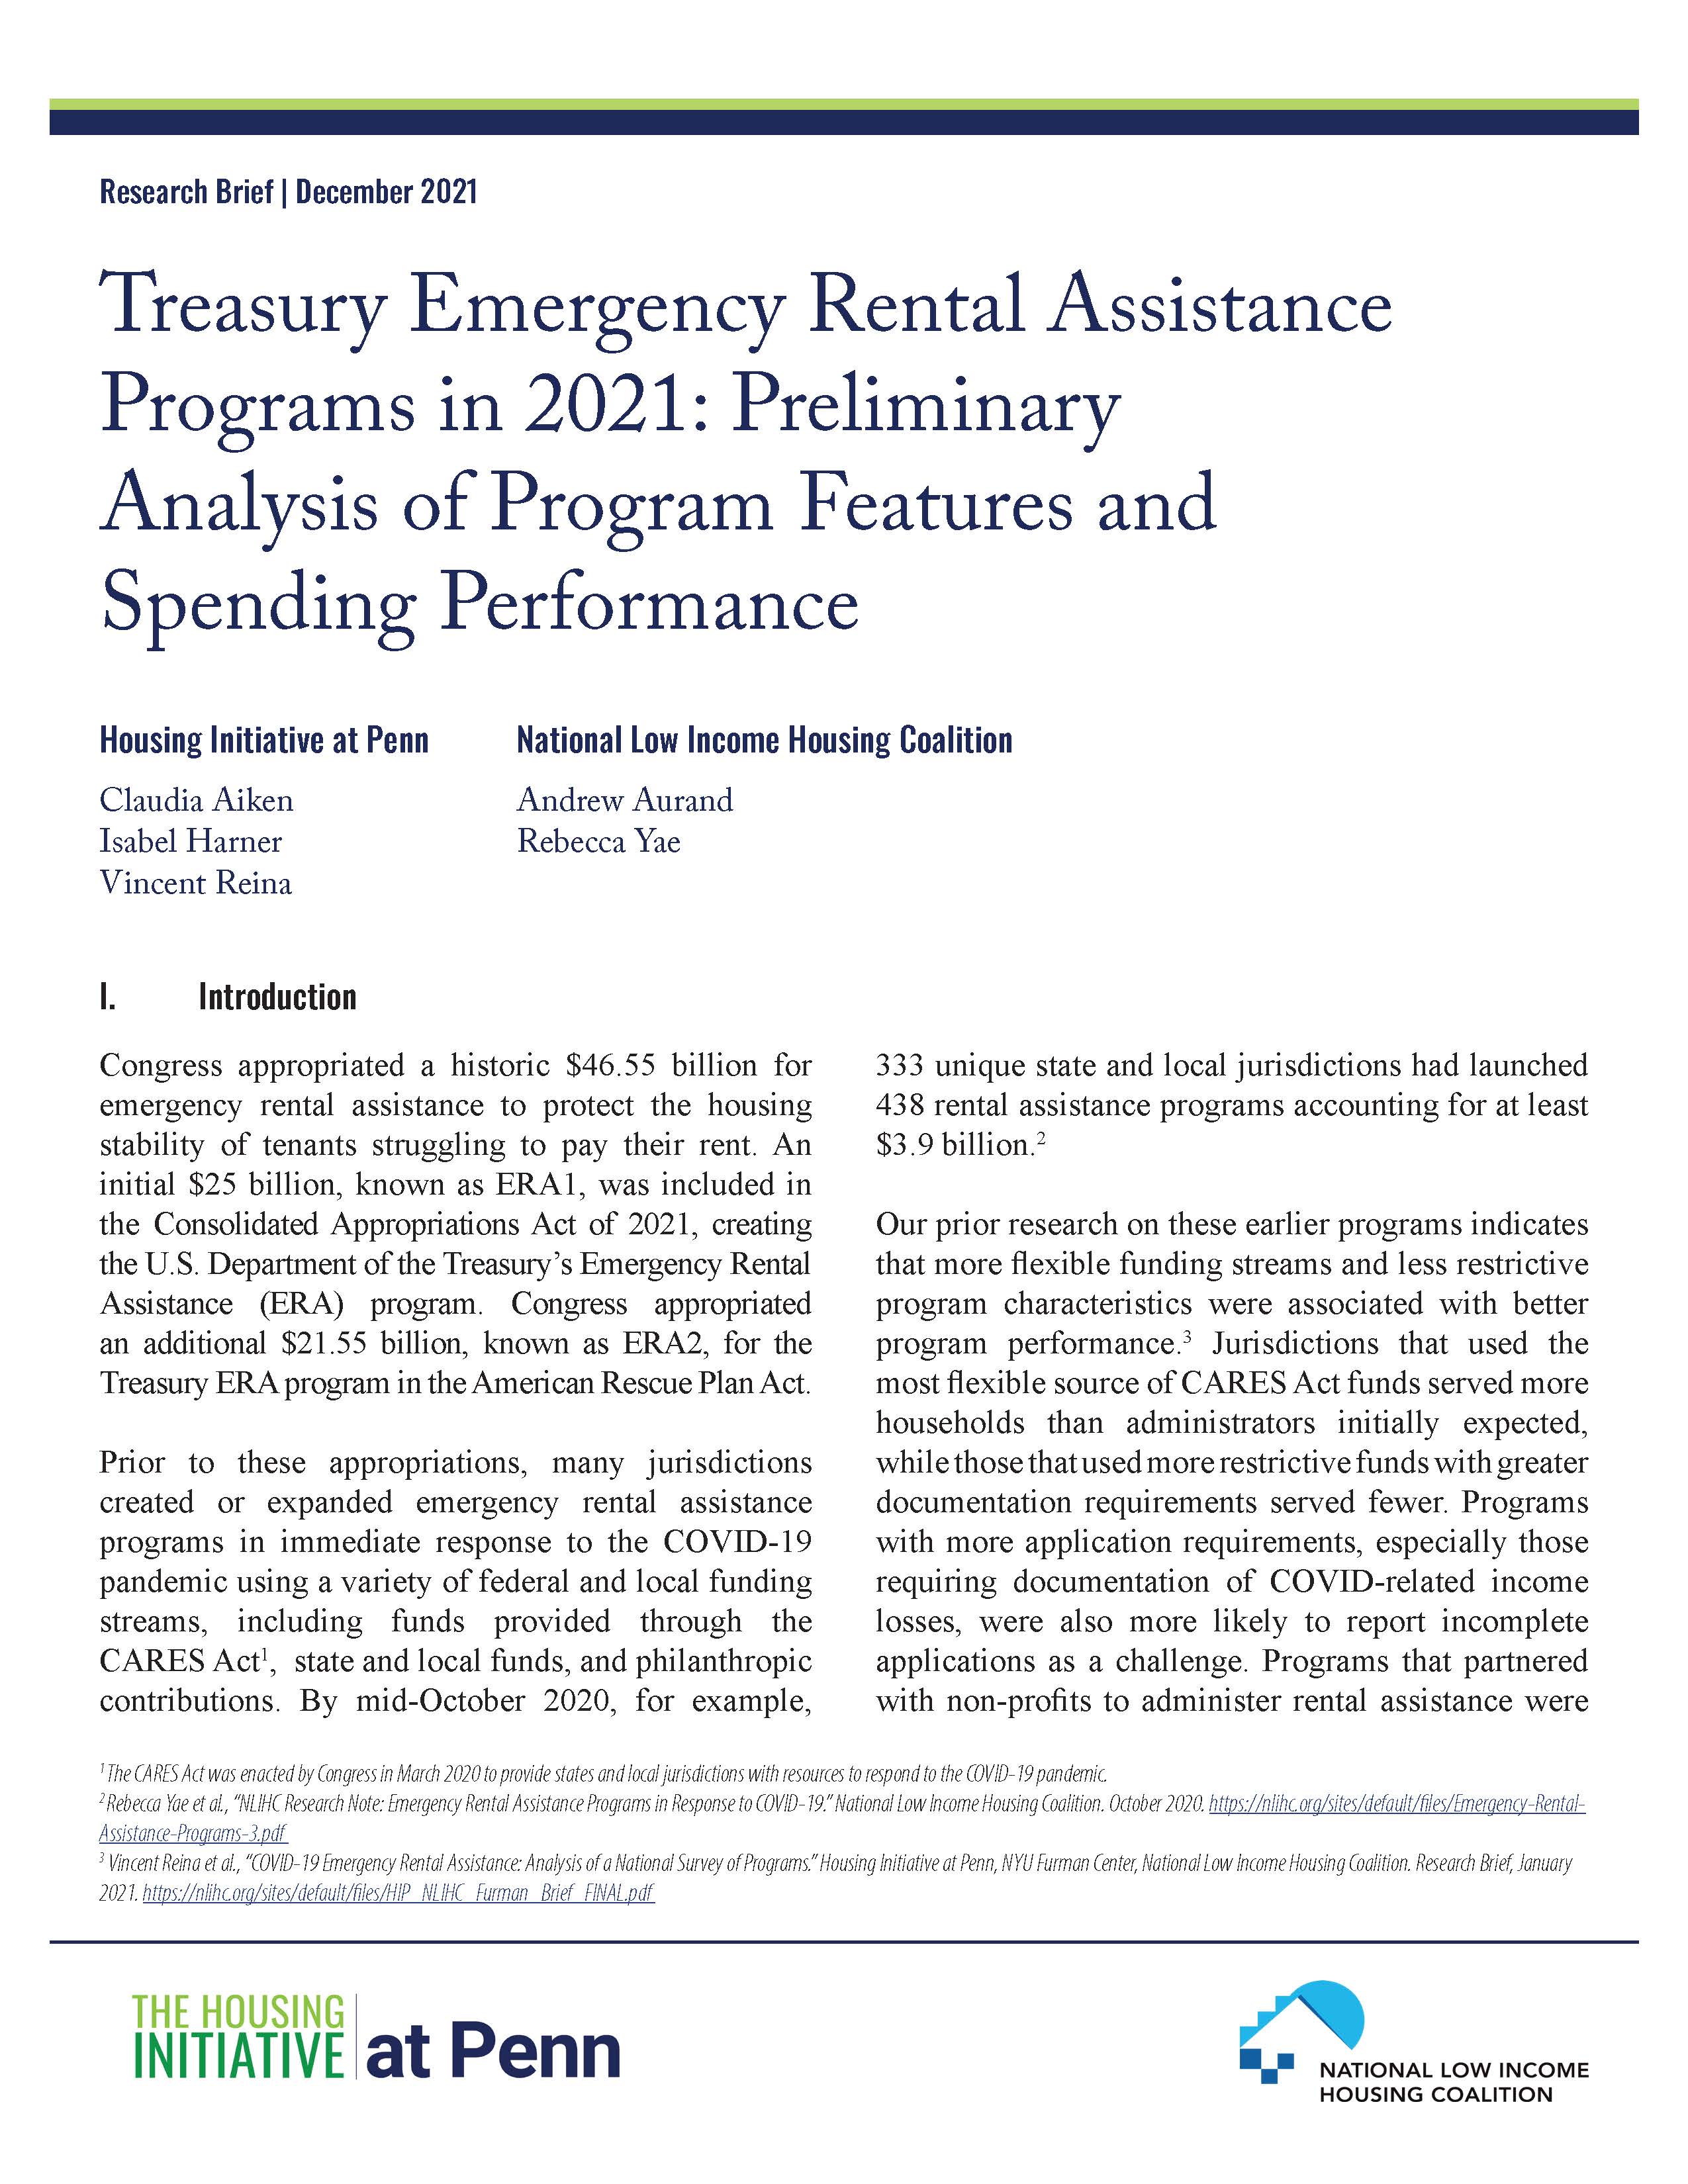 Treasury Emergency Rental Assistance Programs in 2021: Preliminary Analysis of Program Features and Spending Performance